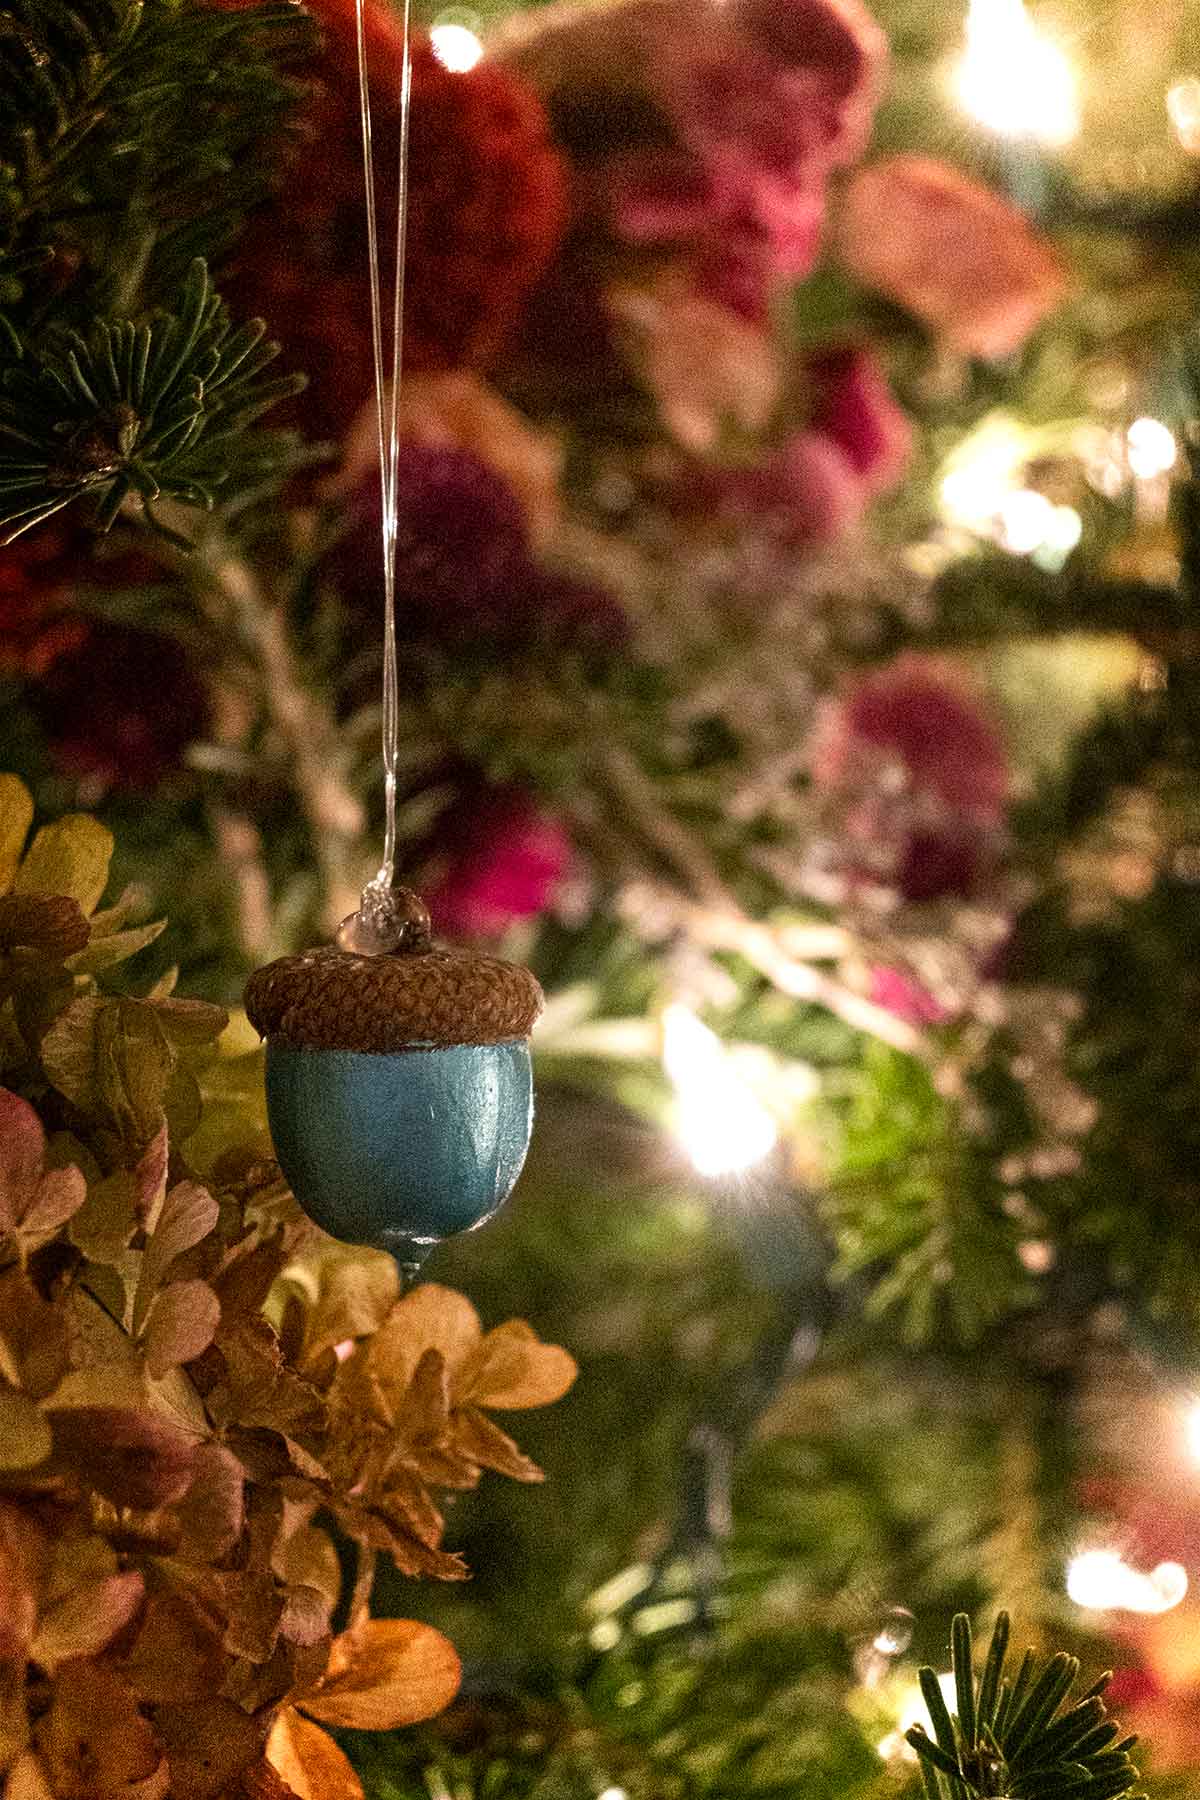 A blue metalic-painted acorn hanging in a decorated Christmas tree.